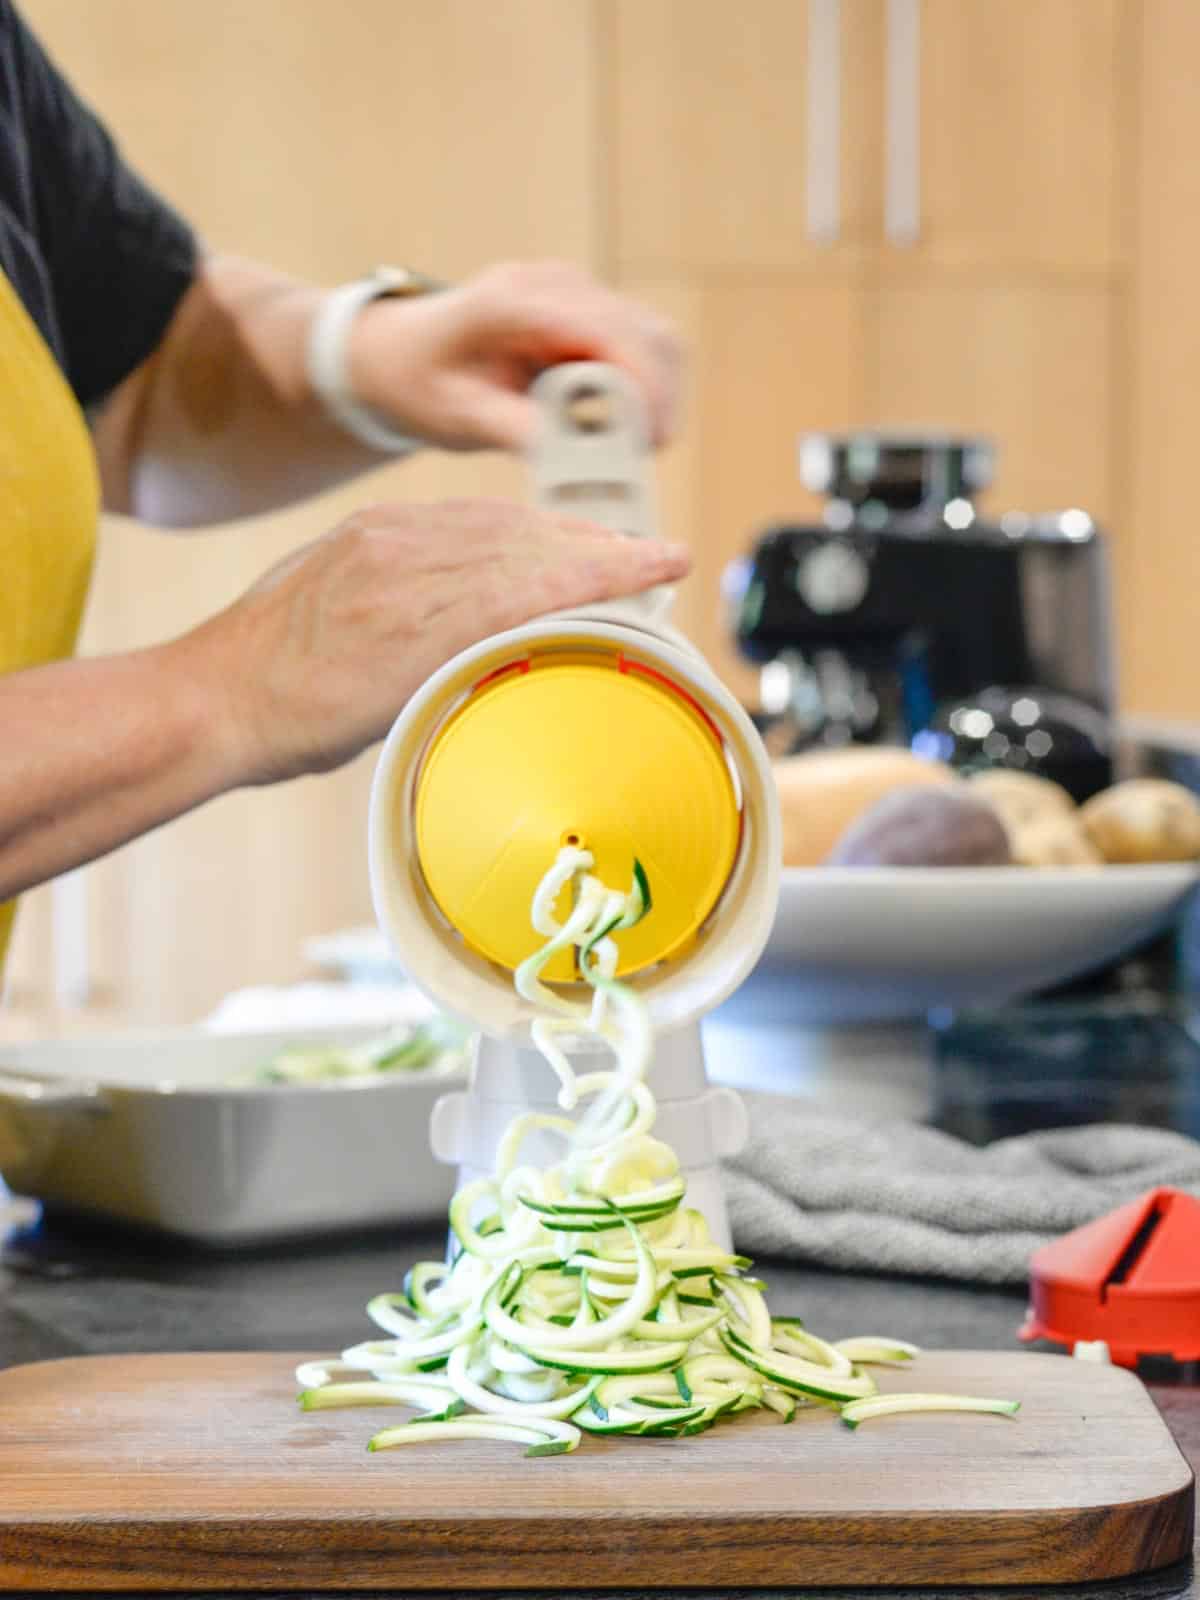 the tupperware spiralizer with the flat blade spiralizing zucchini noodles